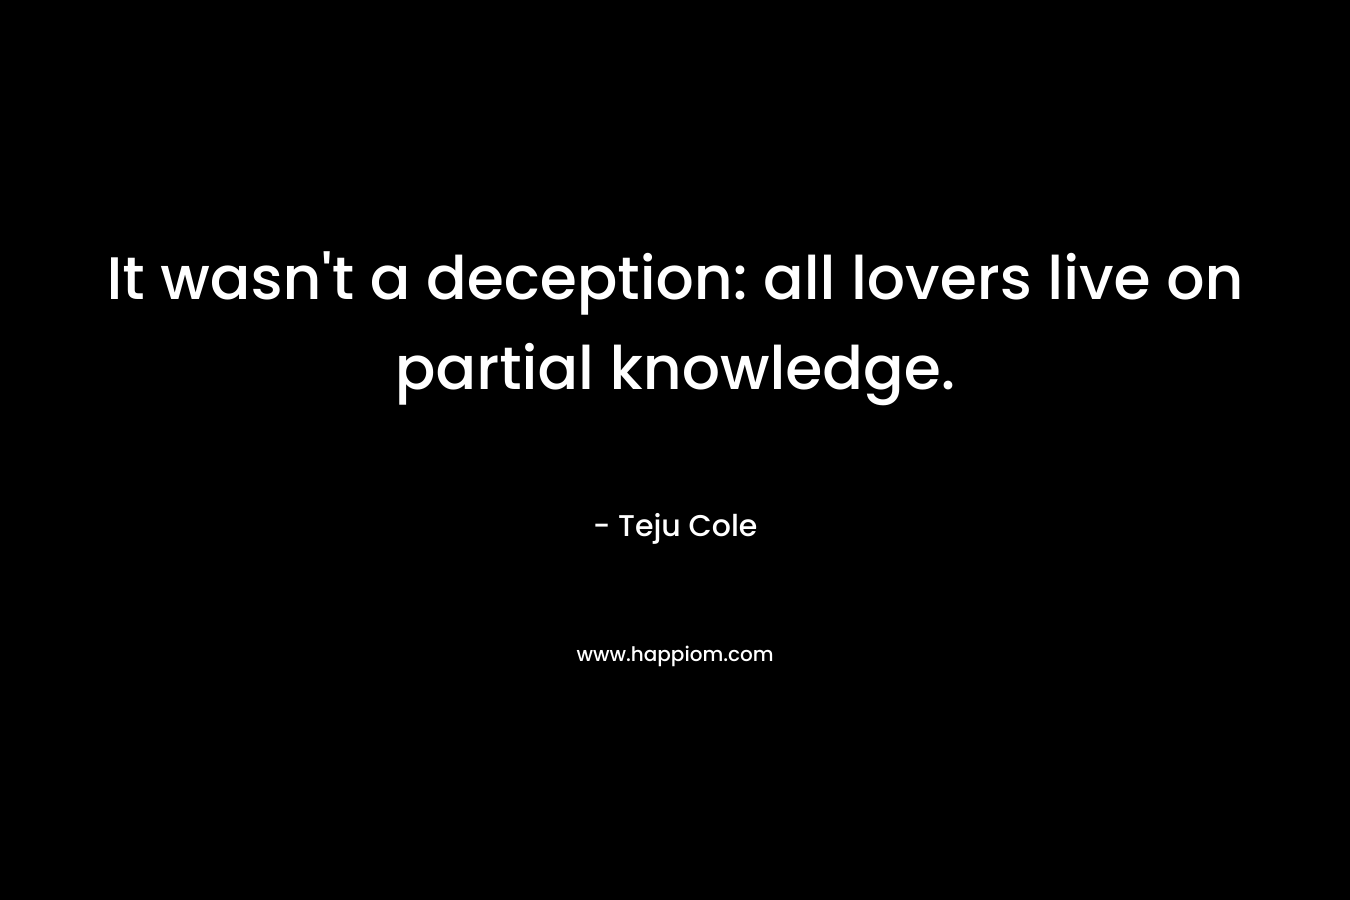 It wasn’t a deception: all lovers live on partial knowledge. – Teju Cole